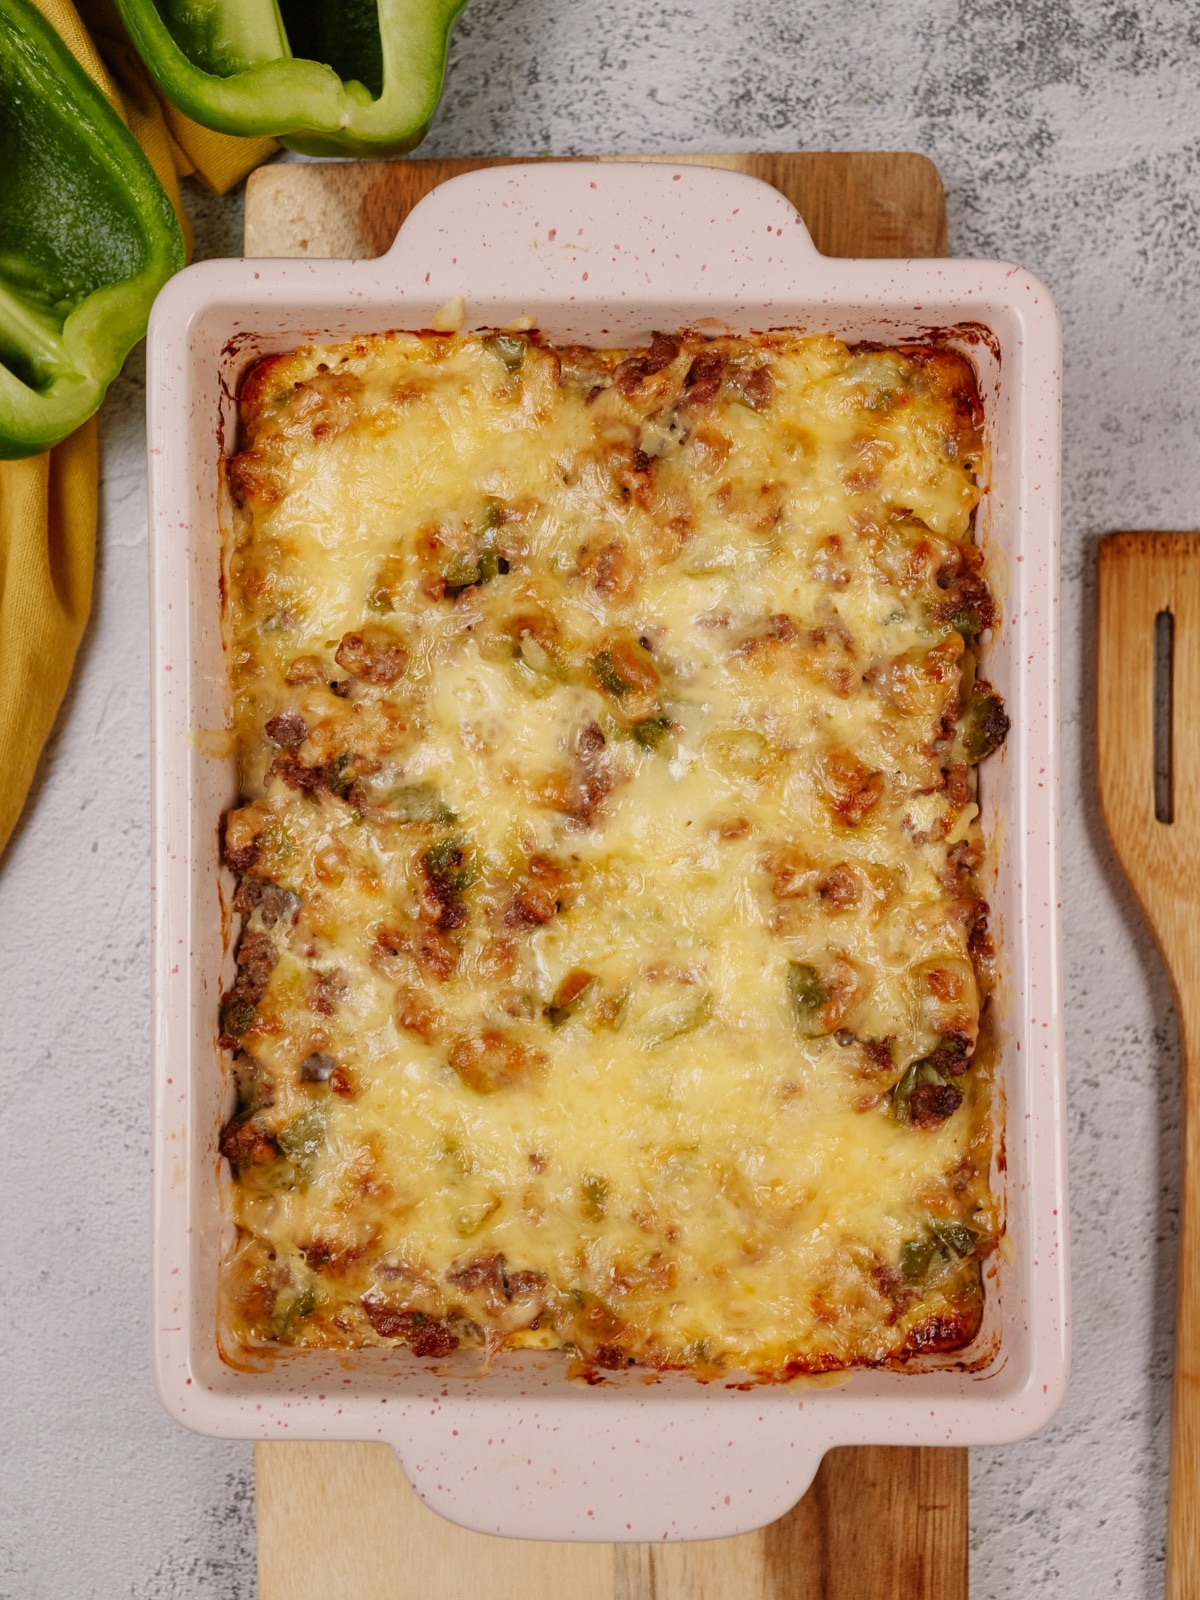 philly cheesesteak casserole in a baking dish